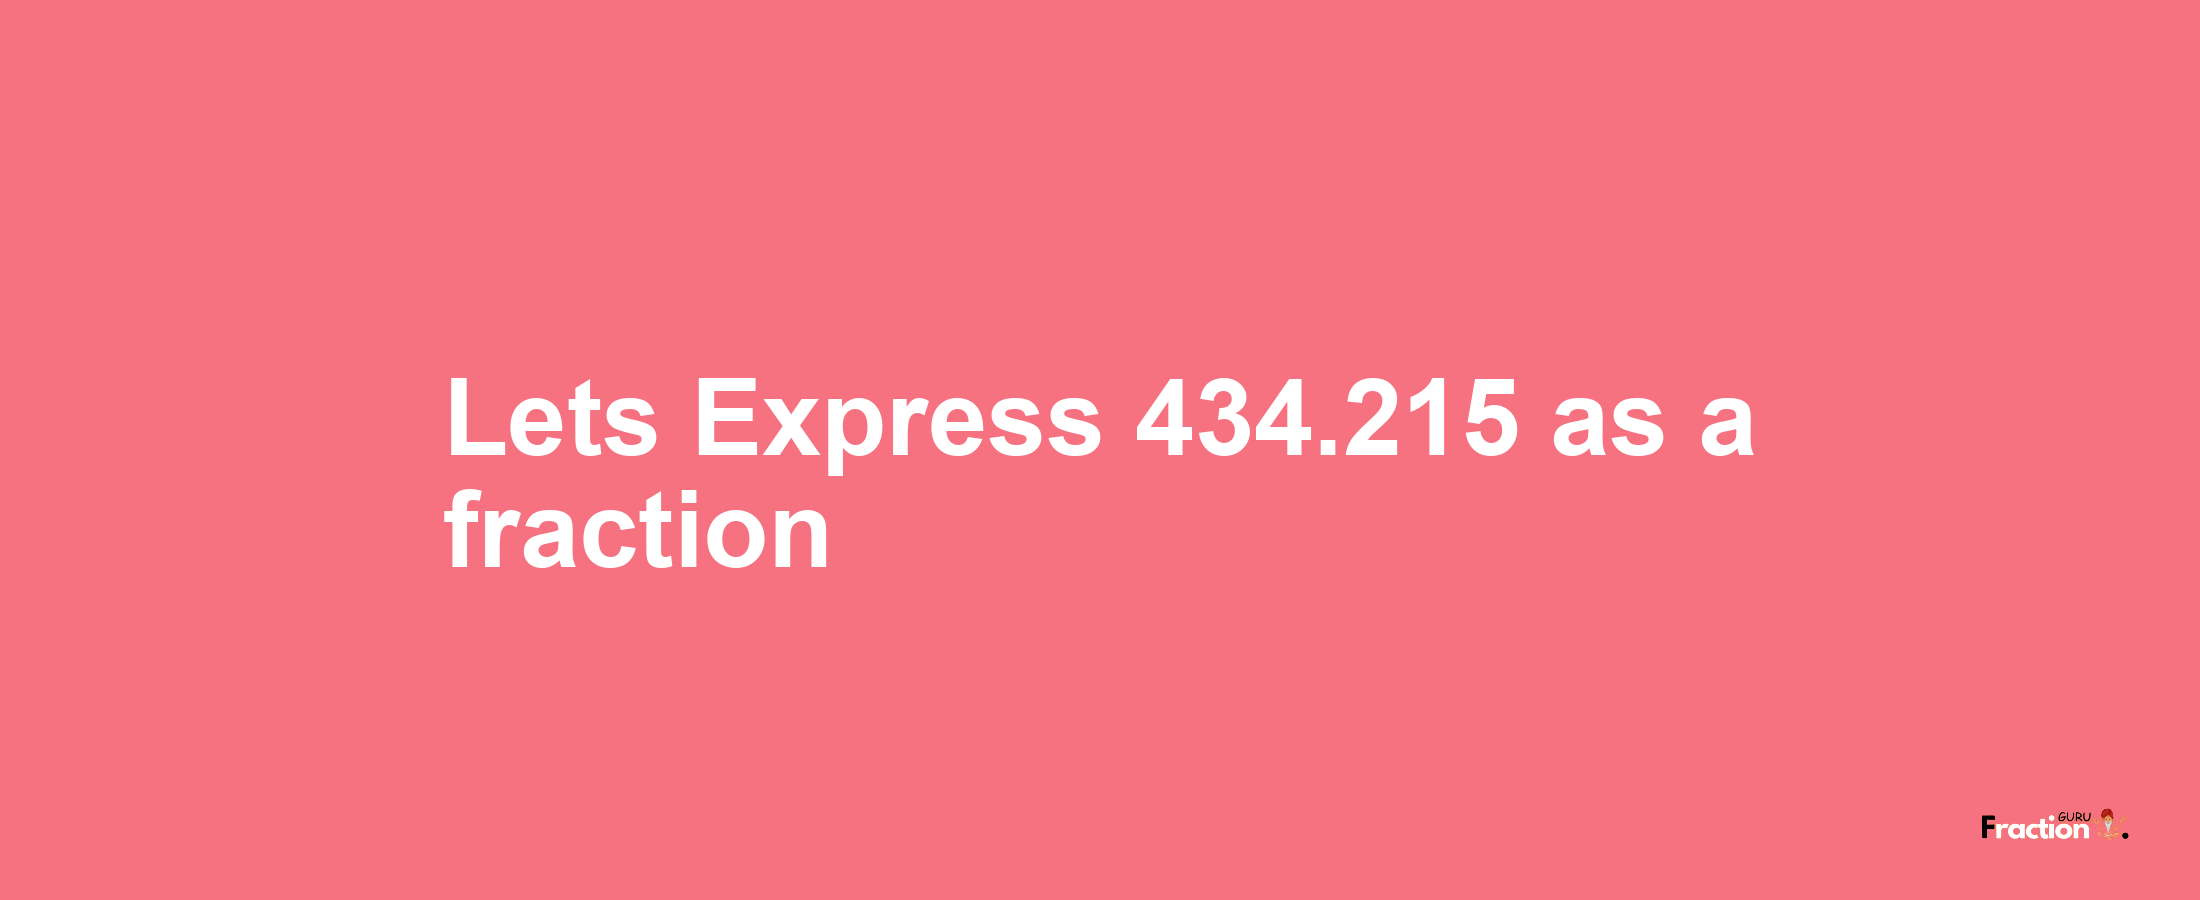 Lets Express 434.215 as afraction